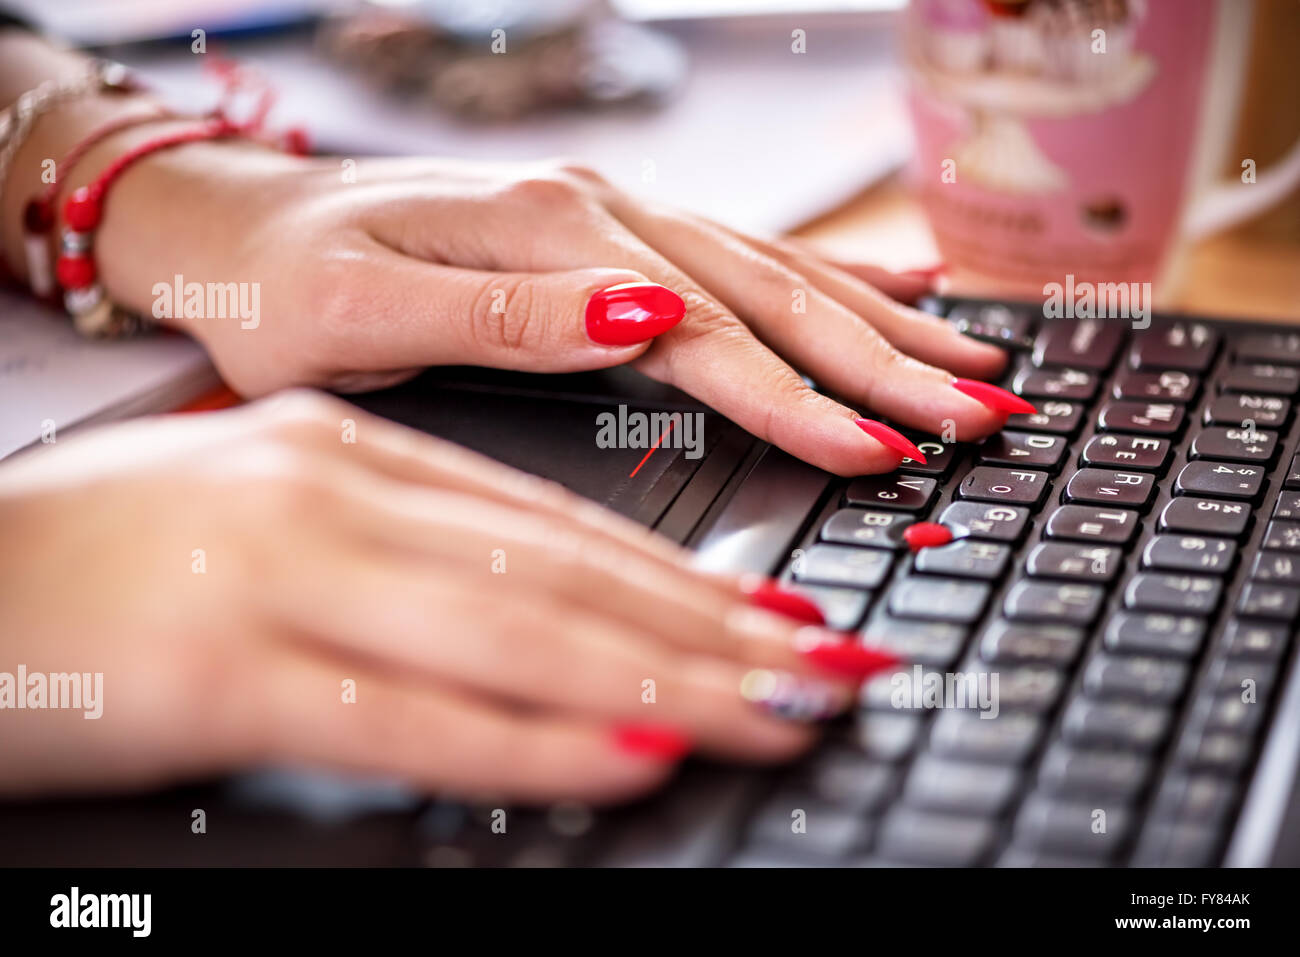 Female office worker typing on the keyboard. Stock Photo